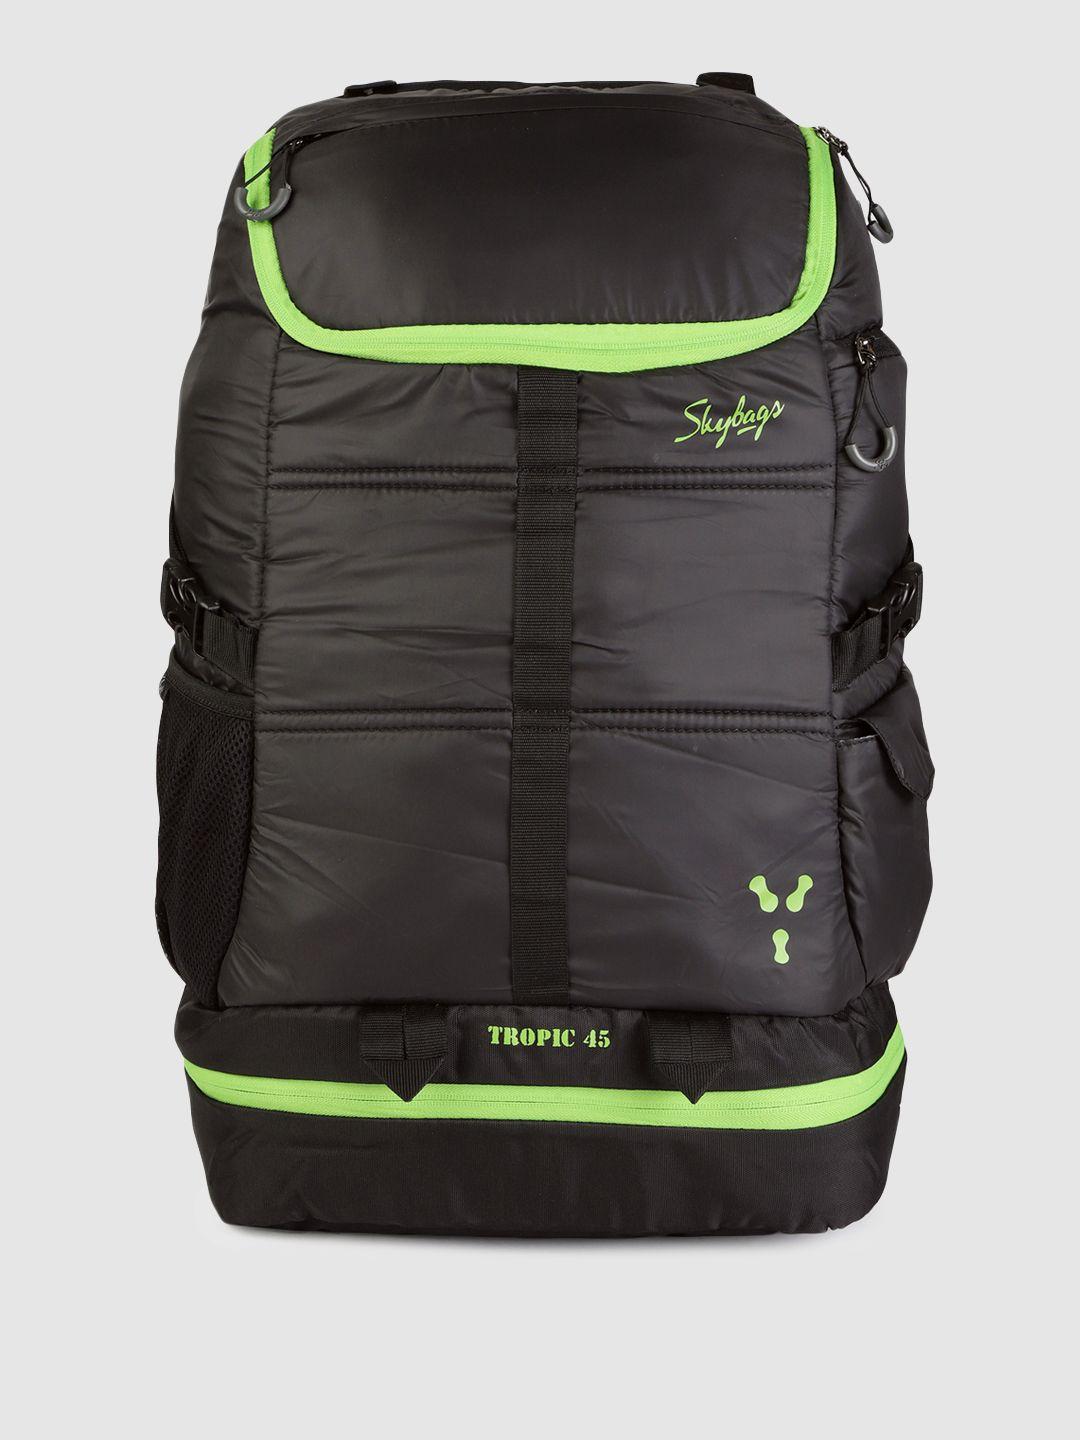 skybags black backpack with compression straps